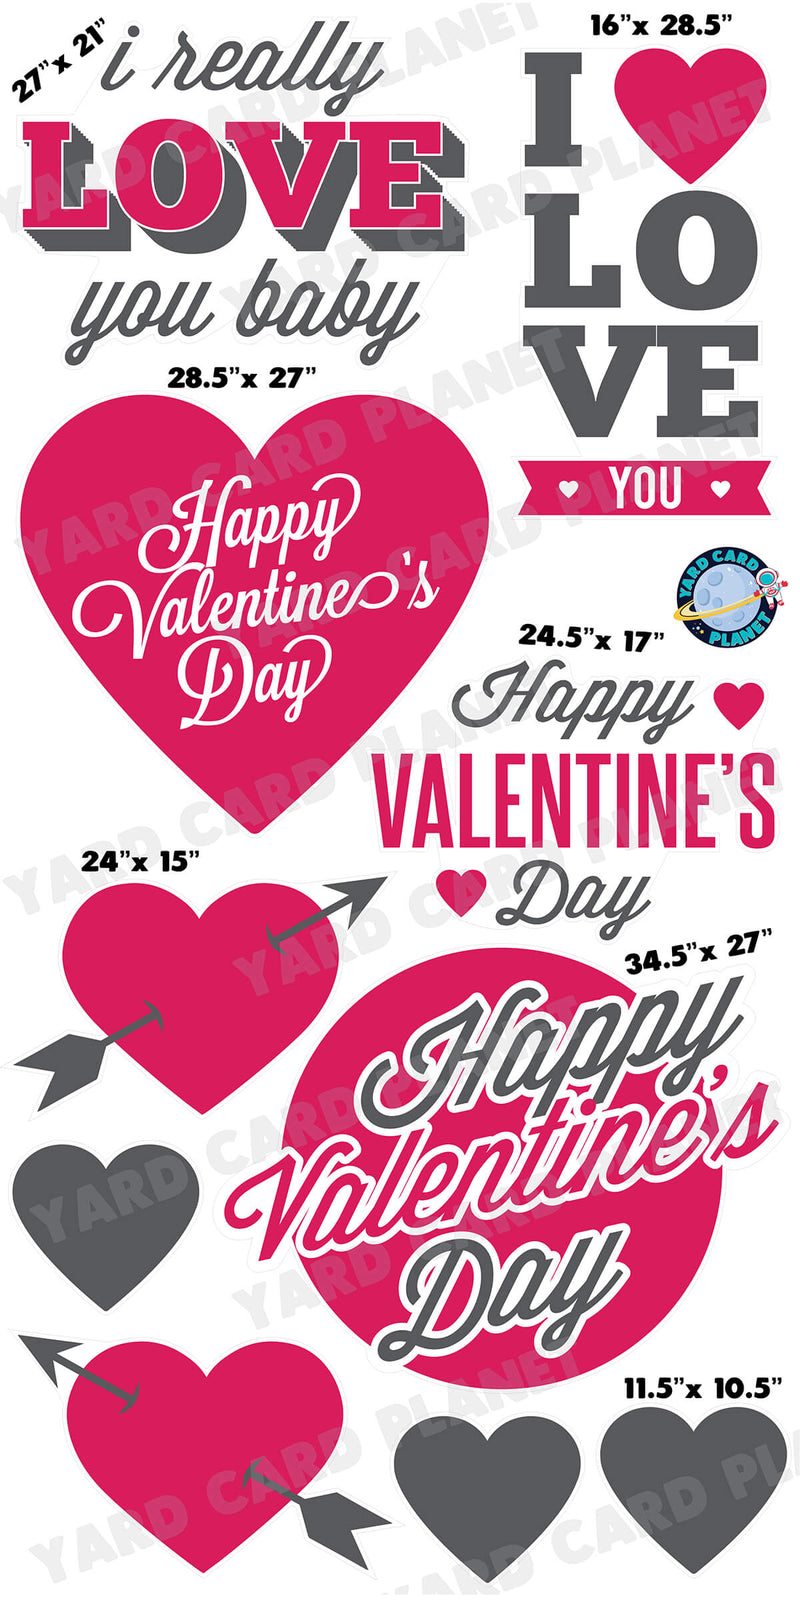 Happy Valentine's Day I Love You Signs and Yard Card Flair Set with Measurements